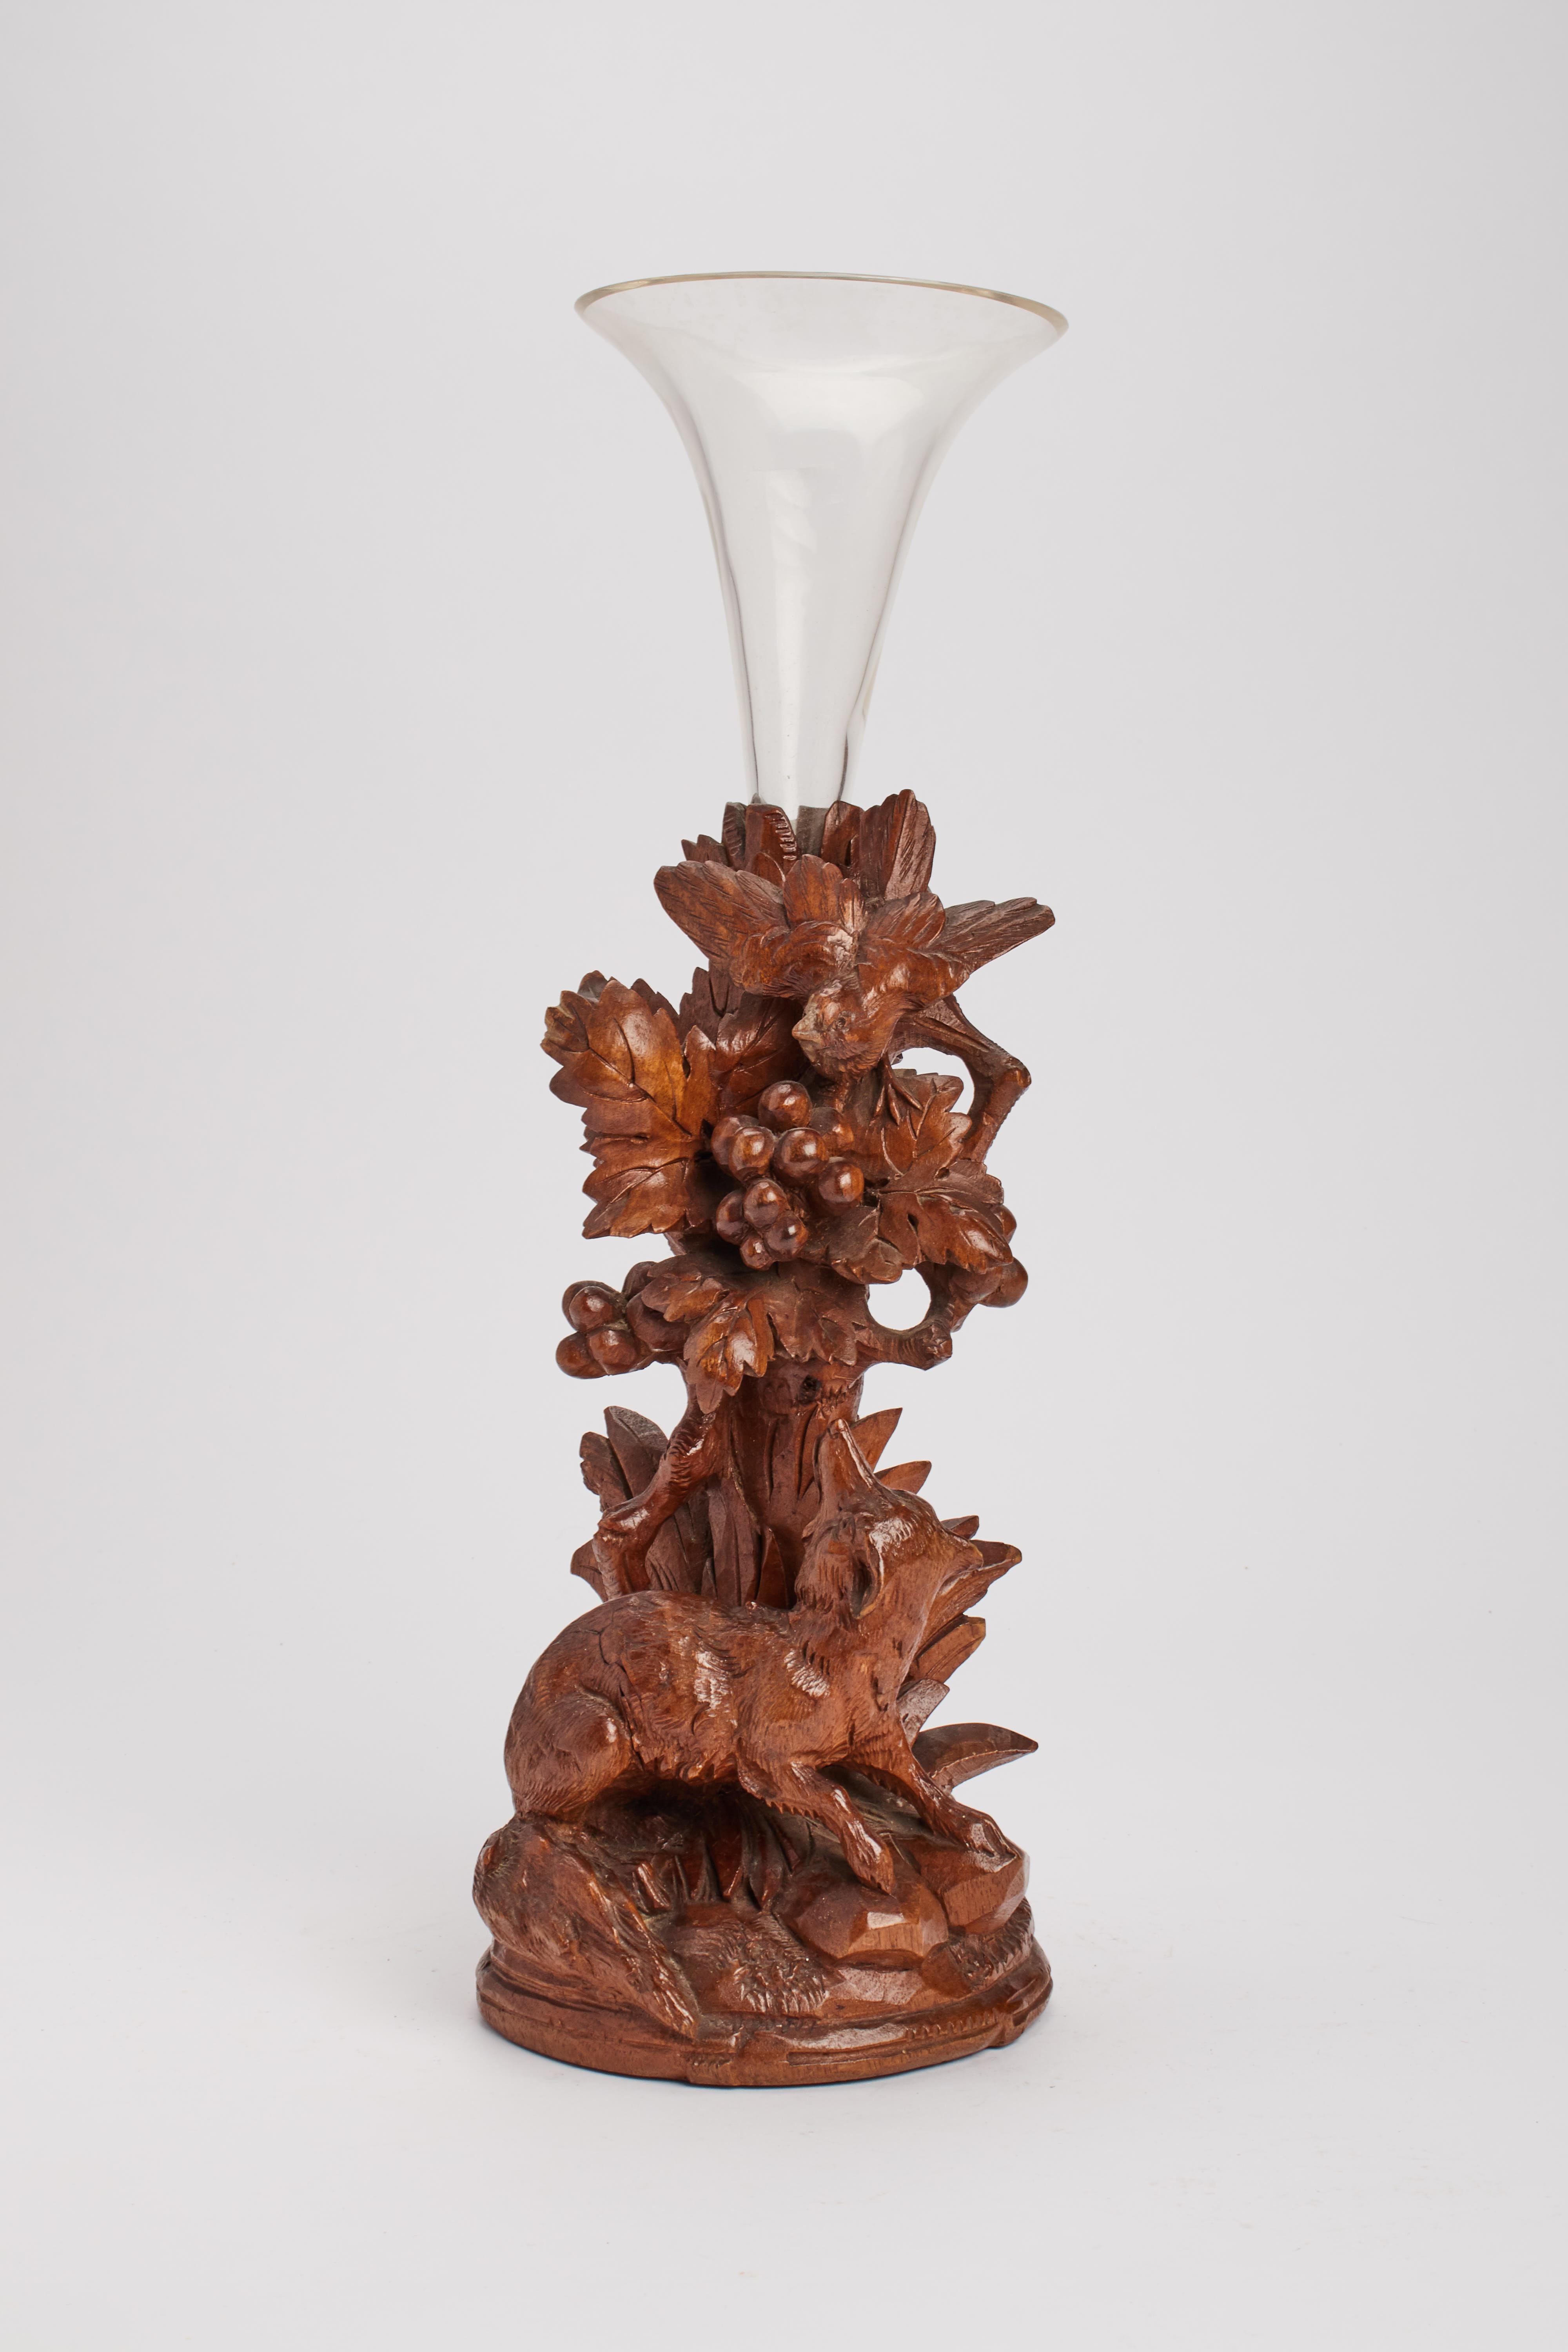 Flower vase realizesd with hazelnut carved wood, depicting a fox watching a bird on a tree. Glass vase. Germany, Black Forest, circa 1880.